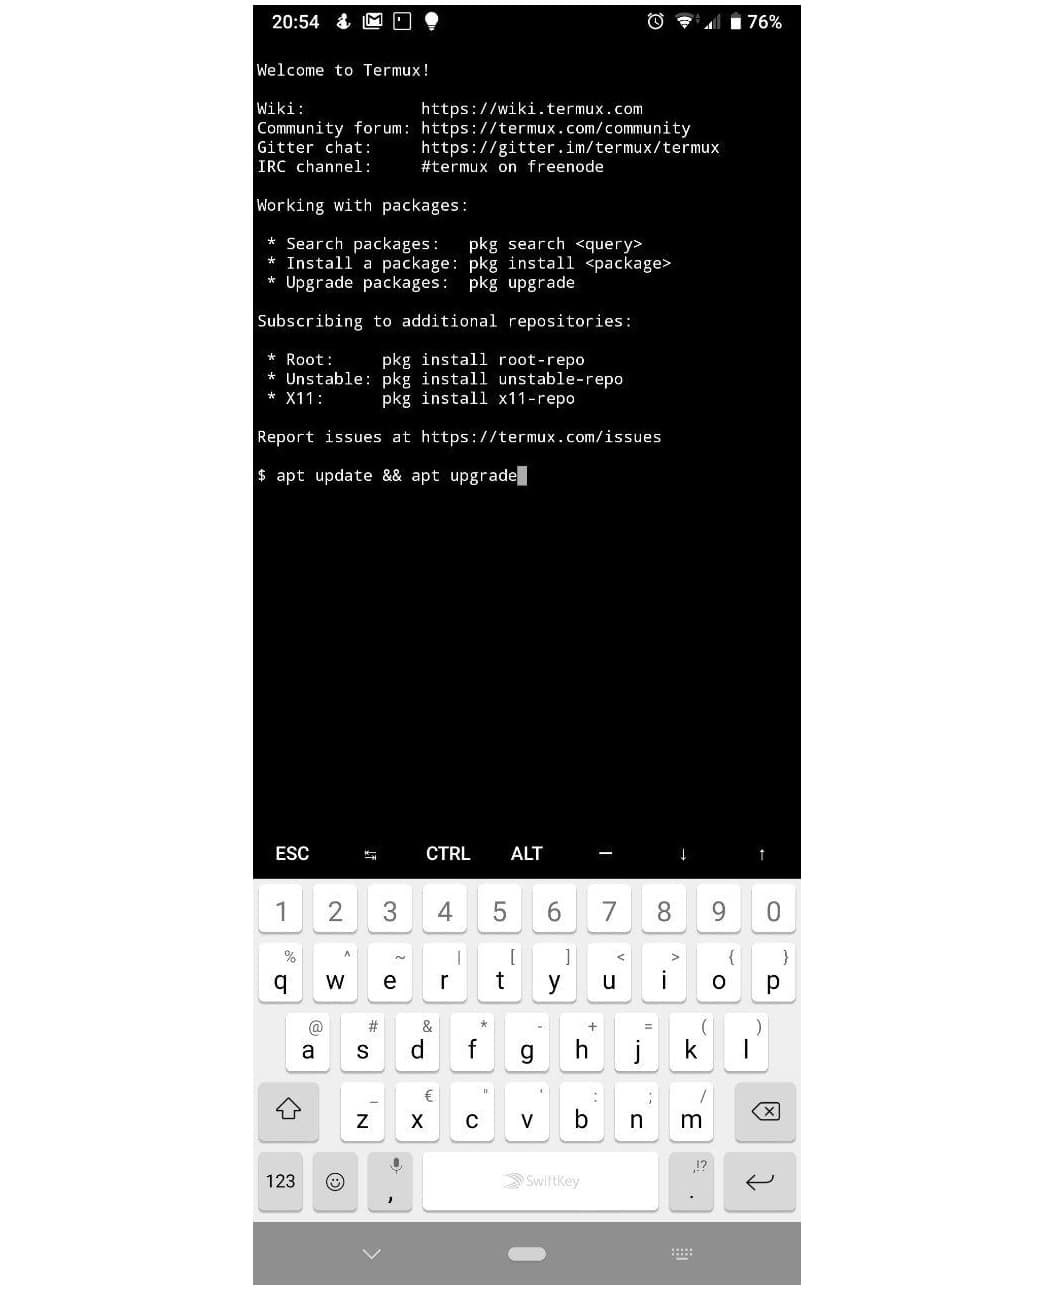 If you want to immerse yourself more about how to hack with Android, then Termux is a very good 'App' to use an discover.